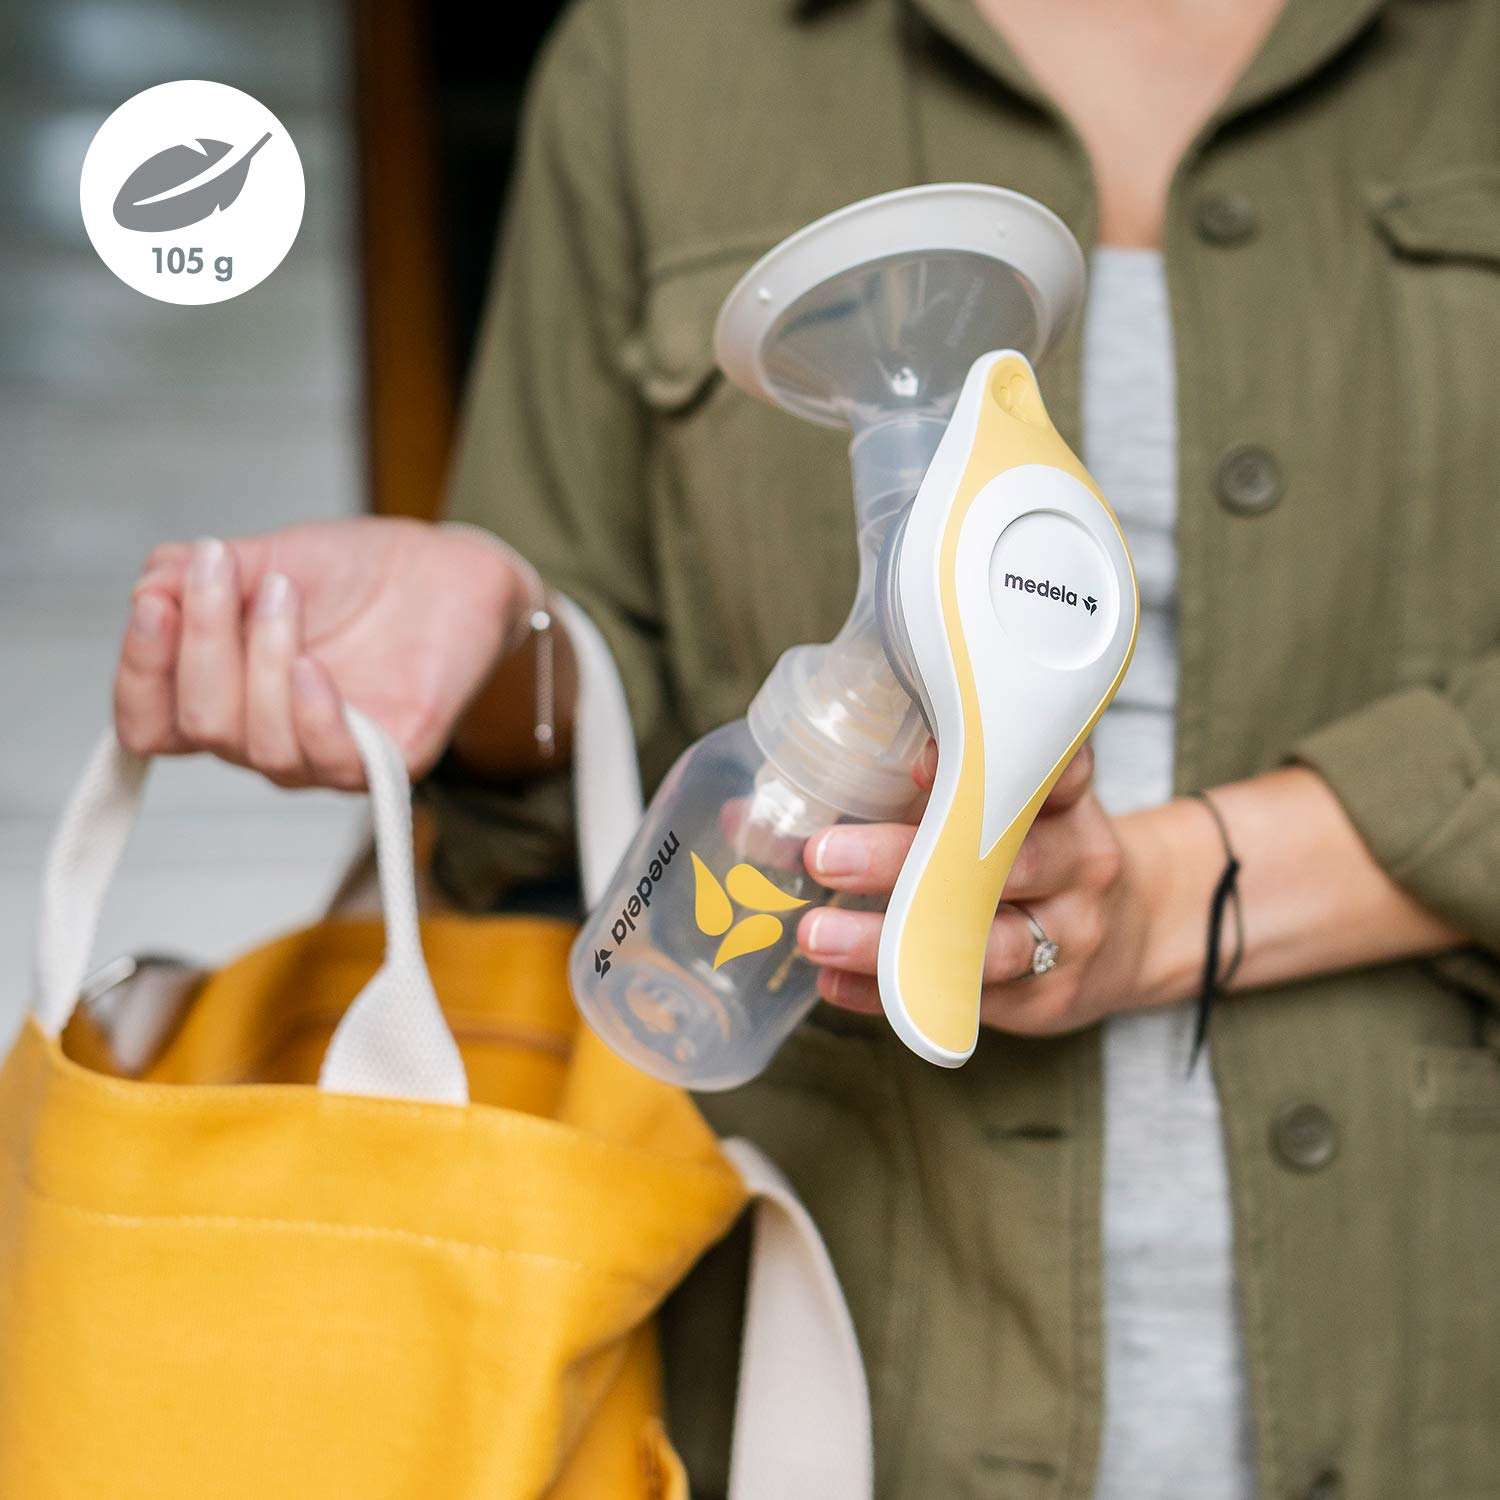 Medela Harmony manual breast pump – Compact Swiss design with PersonalFit Flex breast shield and Medela 2-phase expression technology